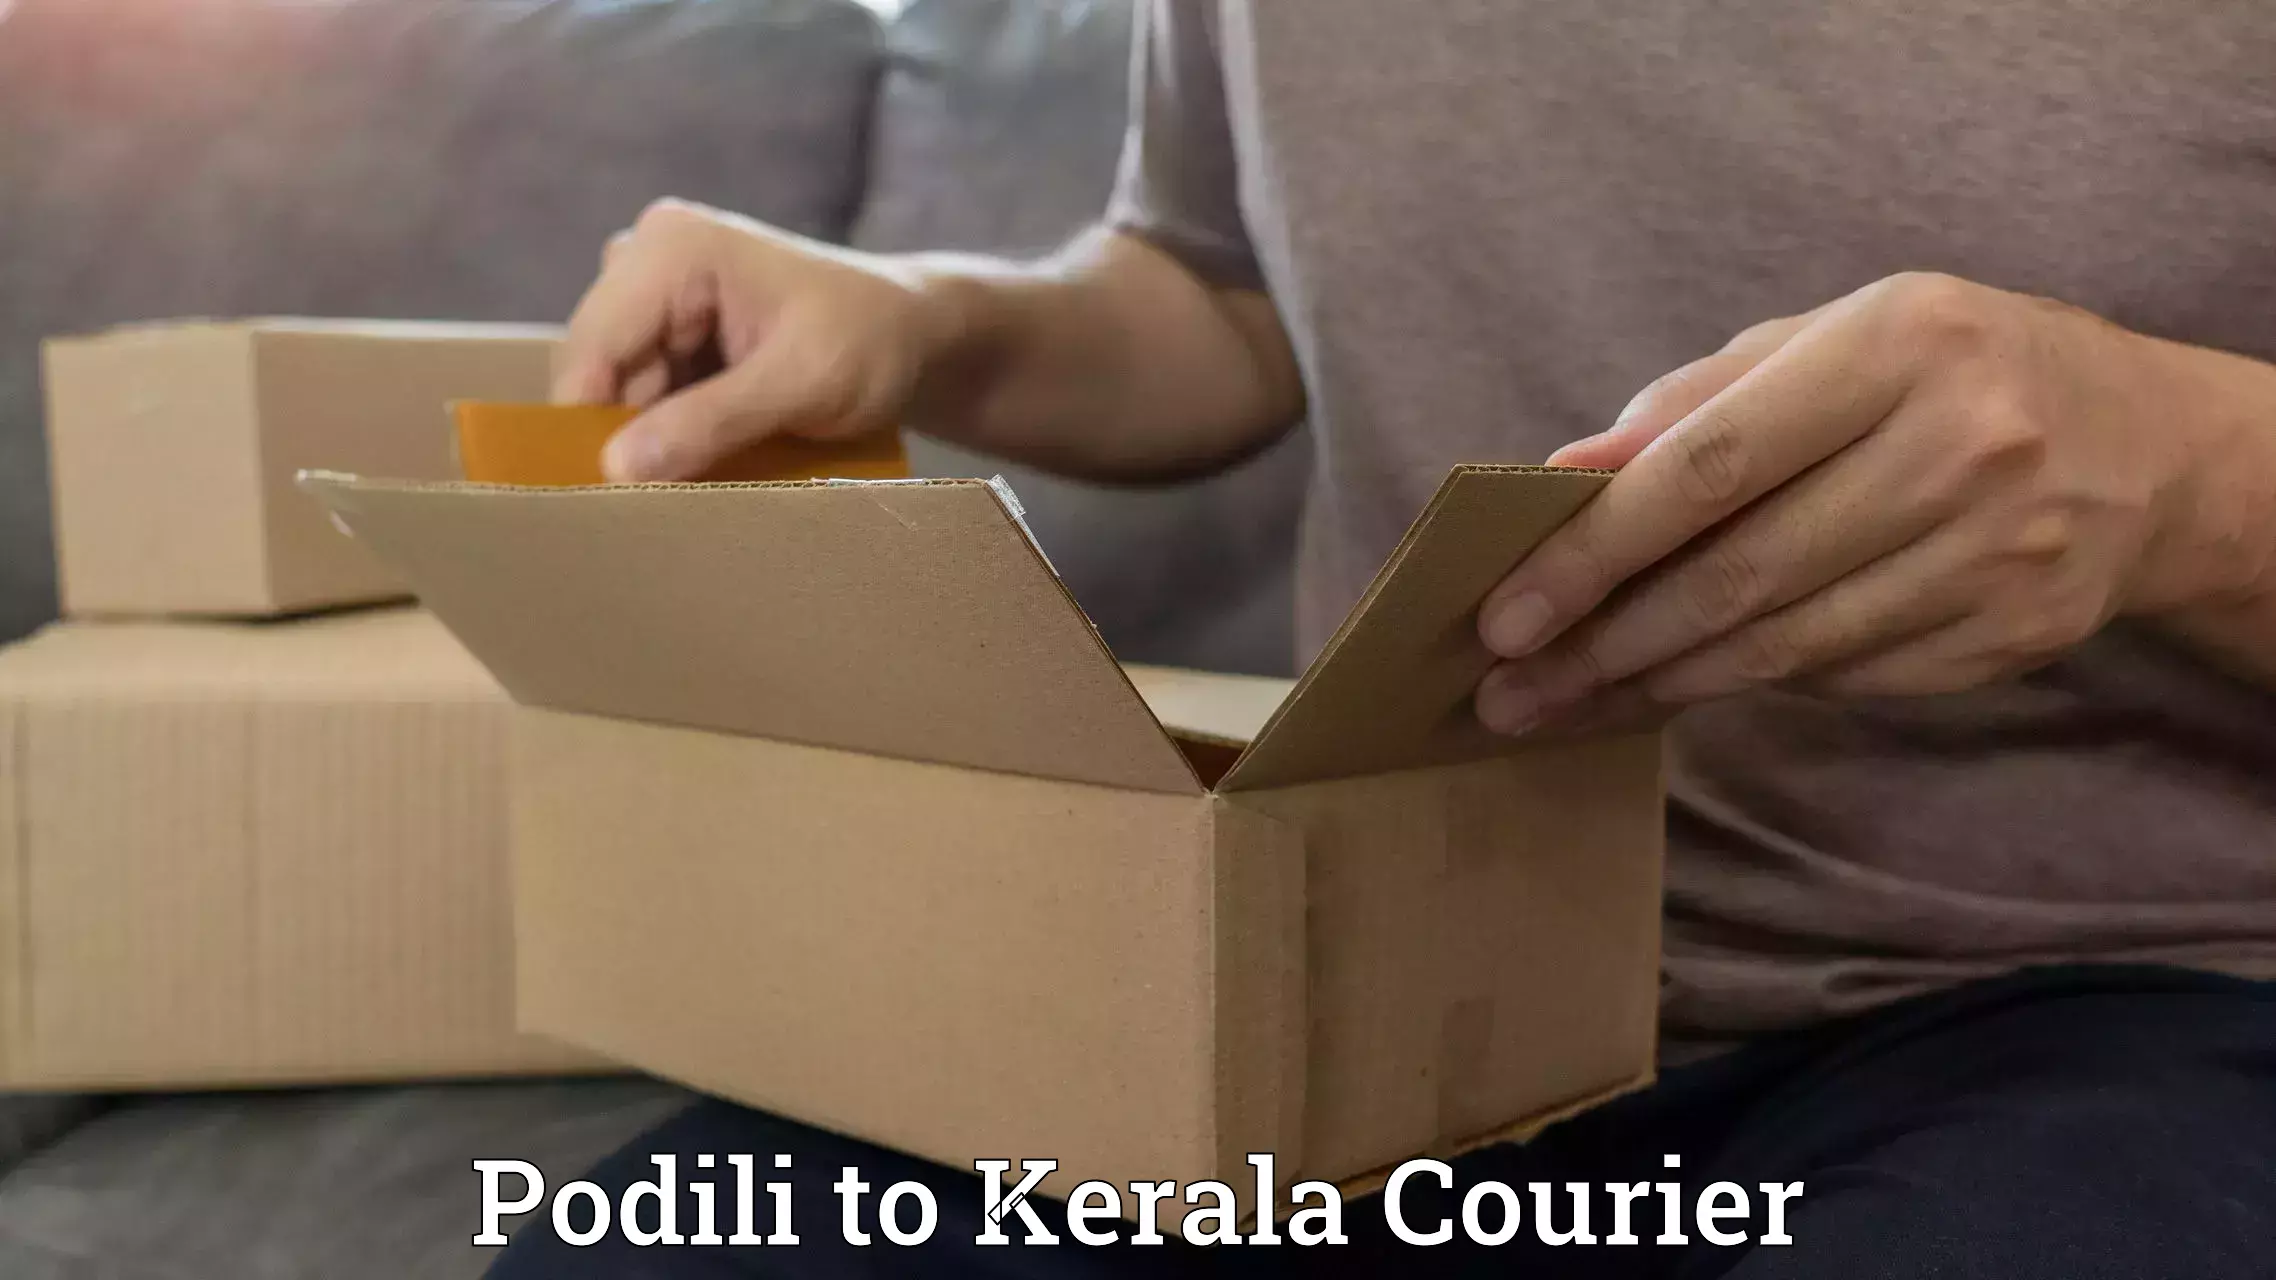 Automated parcel services Podili to IIIT Kottayam